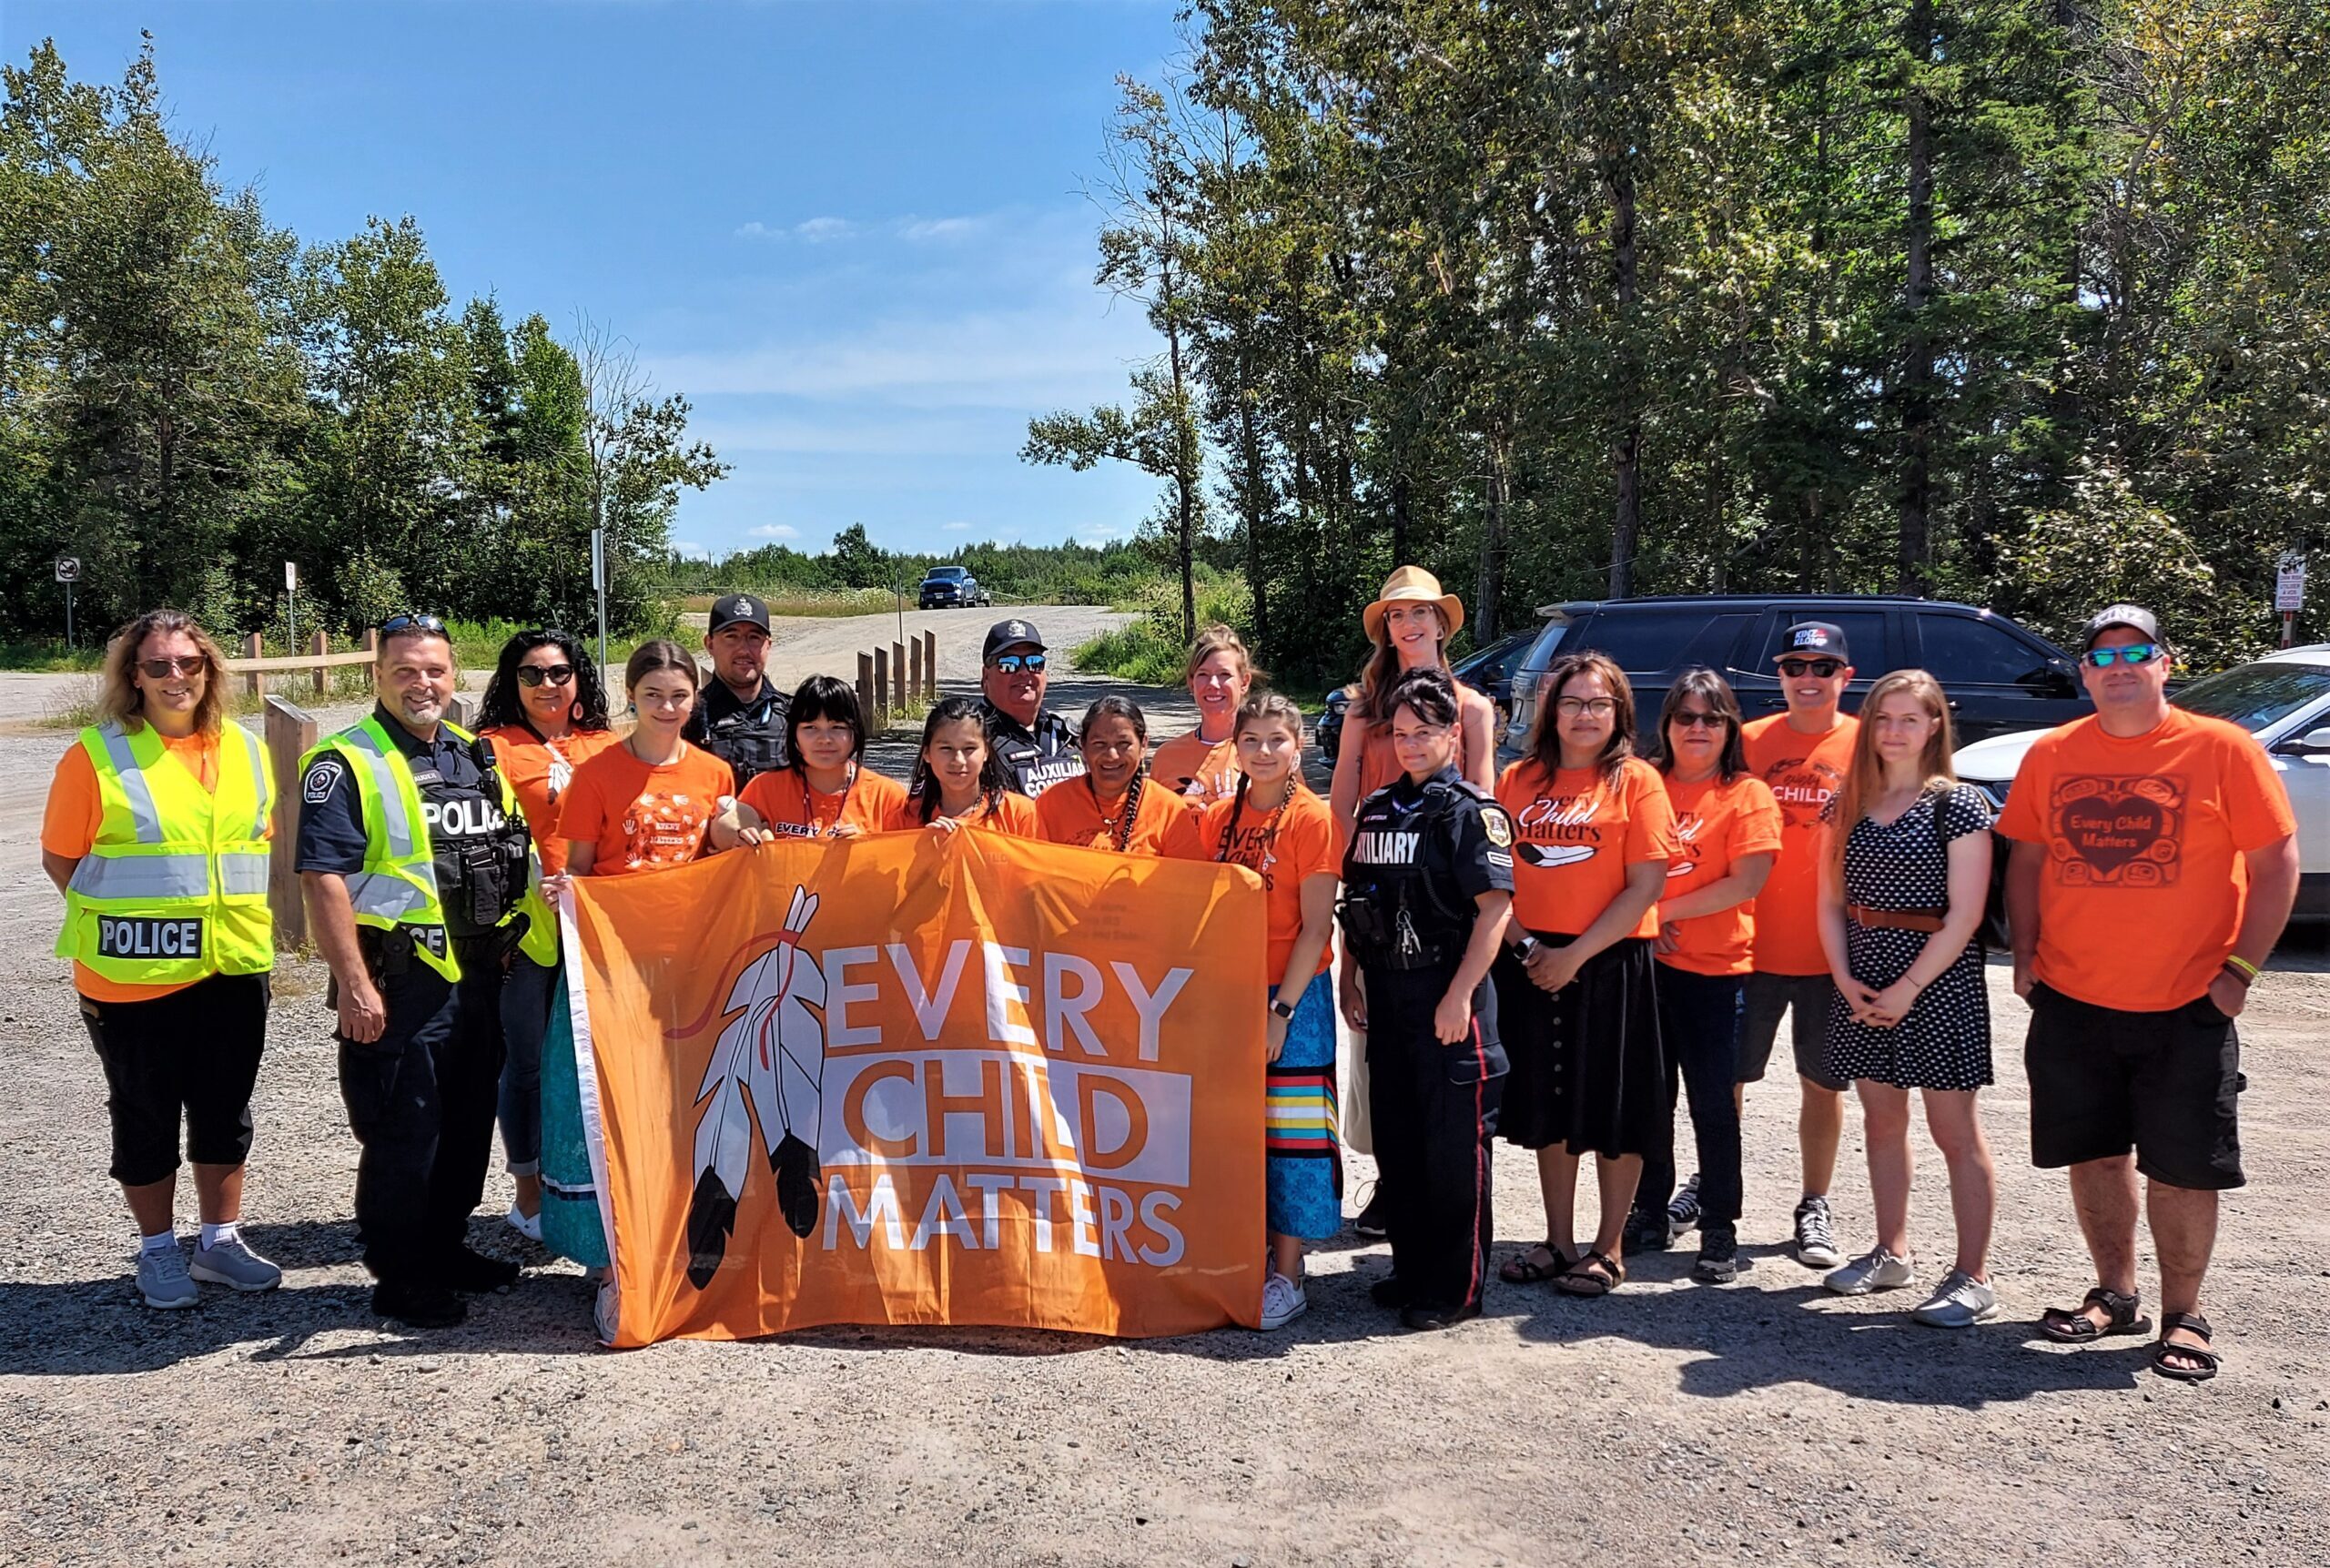 Timmins Police A group of people in orange shirts posing with an orange Timmins Police banner.